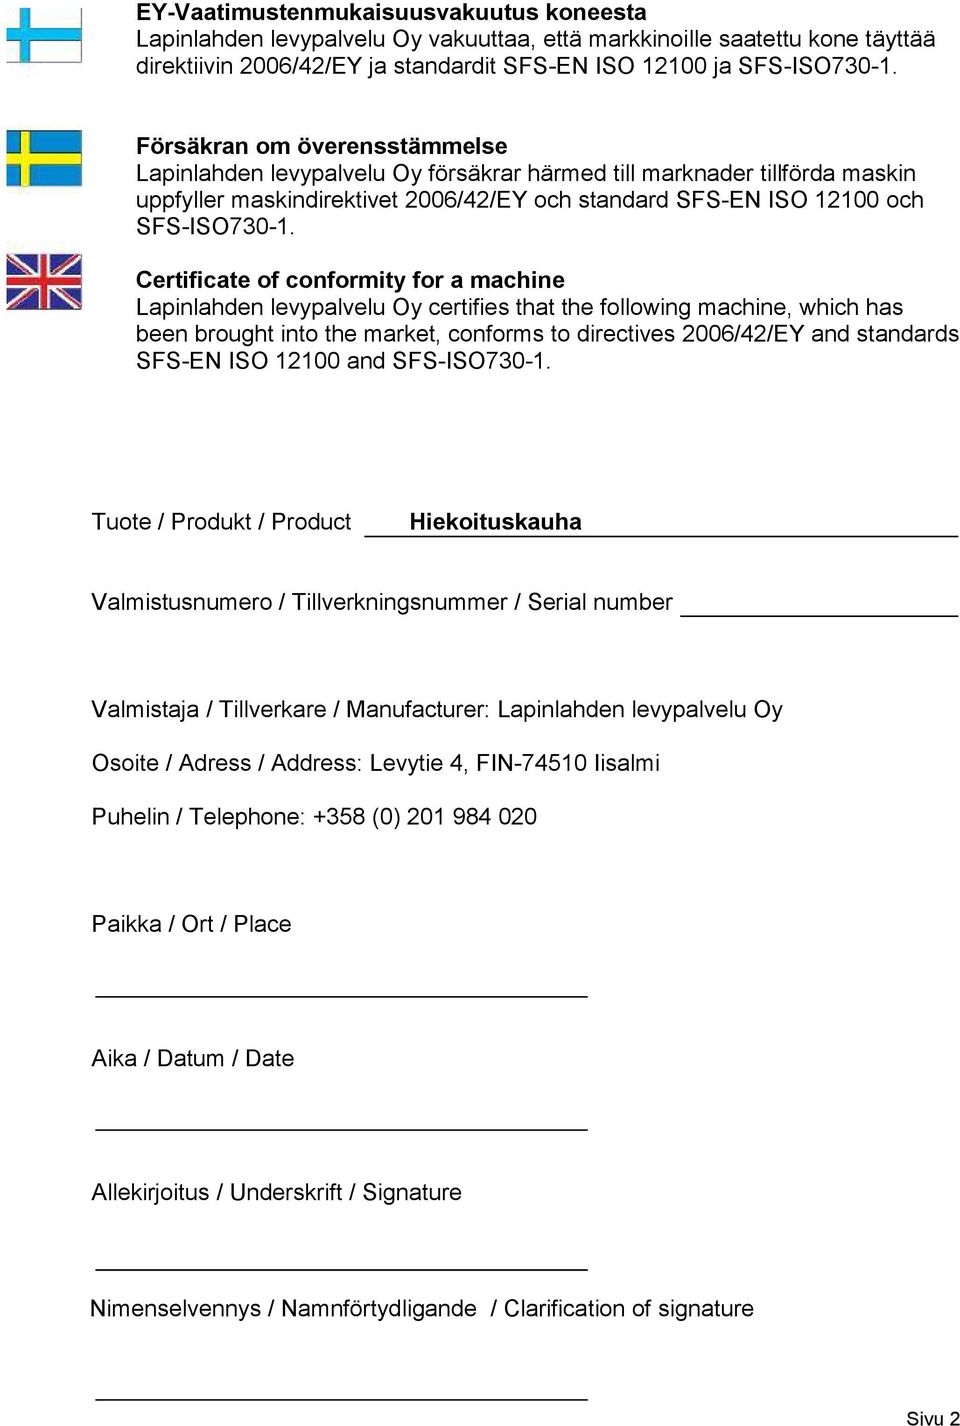 Certificate of conformity for a machine Lapinlahden levypalvelu Oy certifies that the following machine, which has been brought into the market, conforms to directives 2006/42/EY and standards SFS-EN